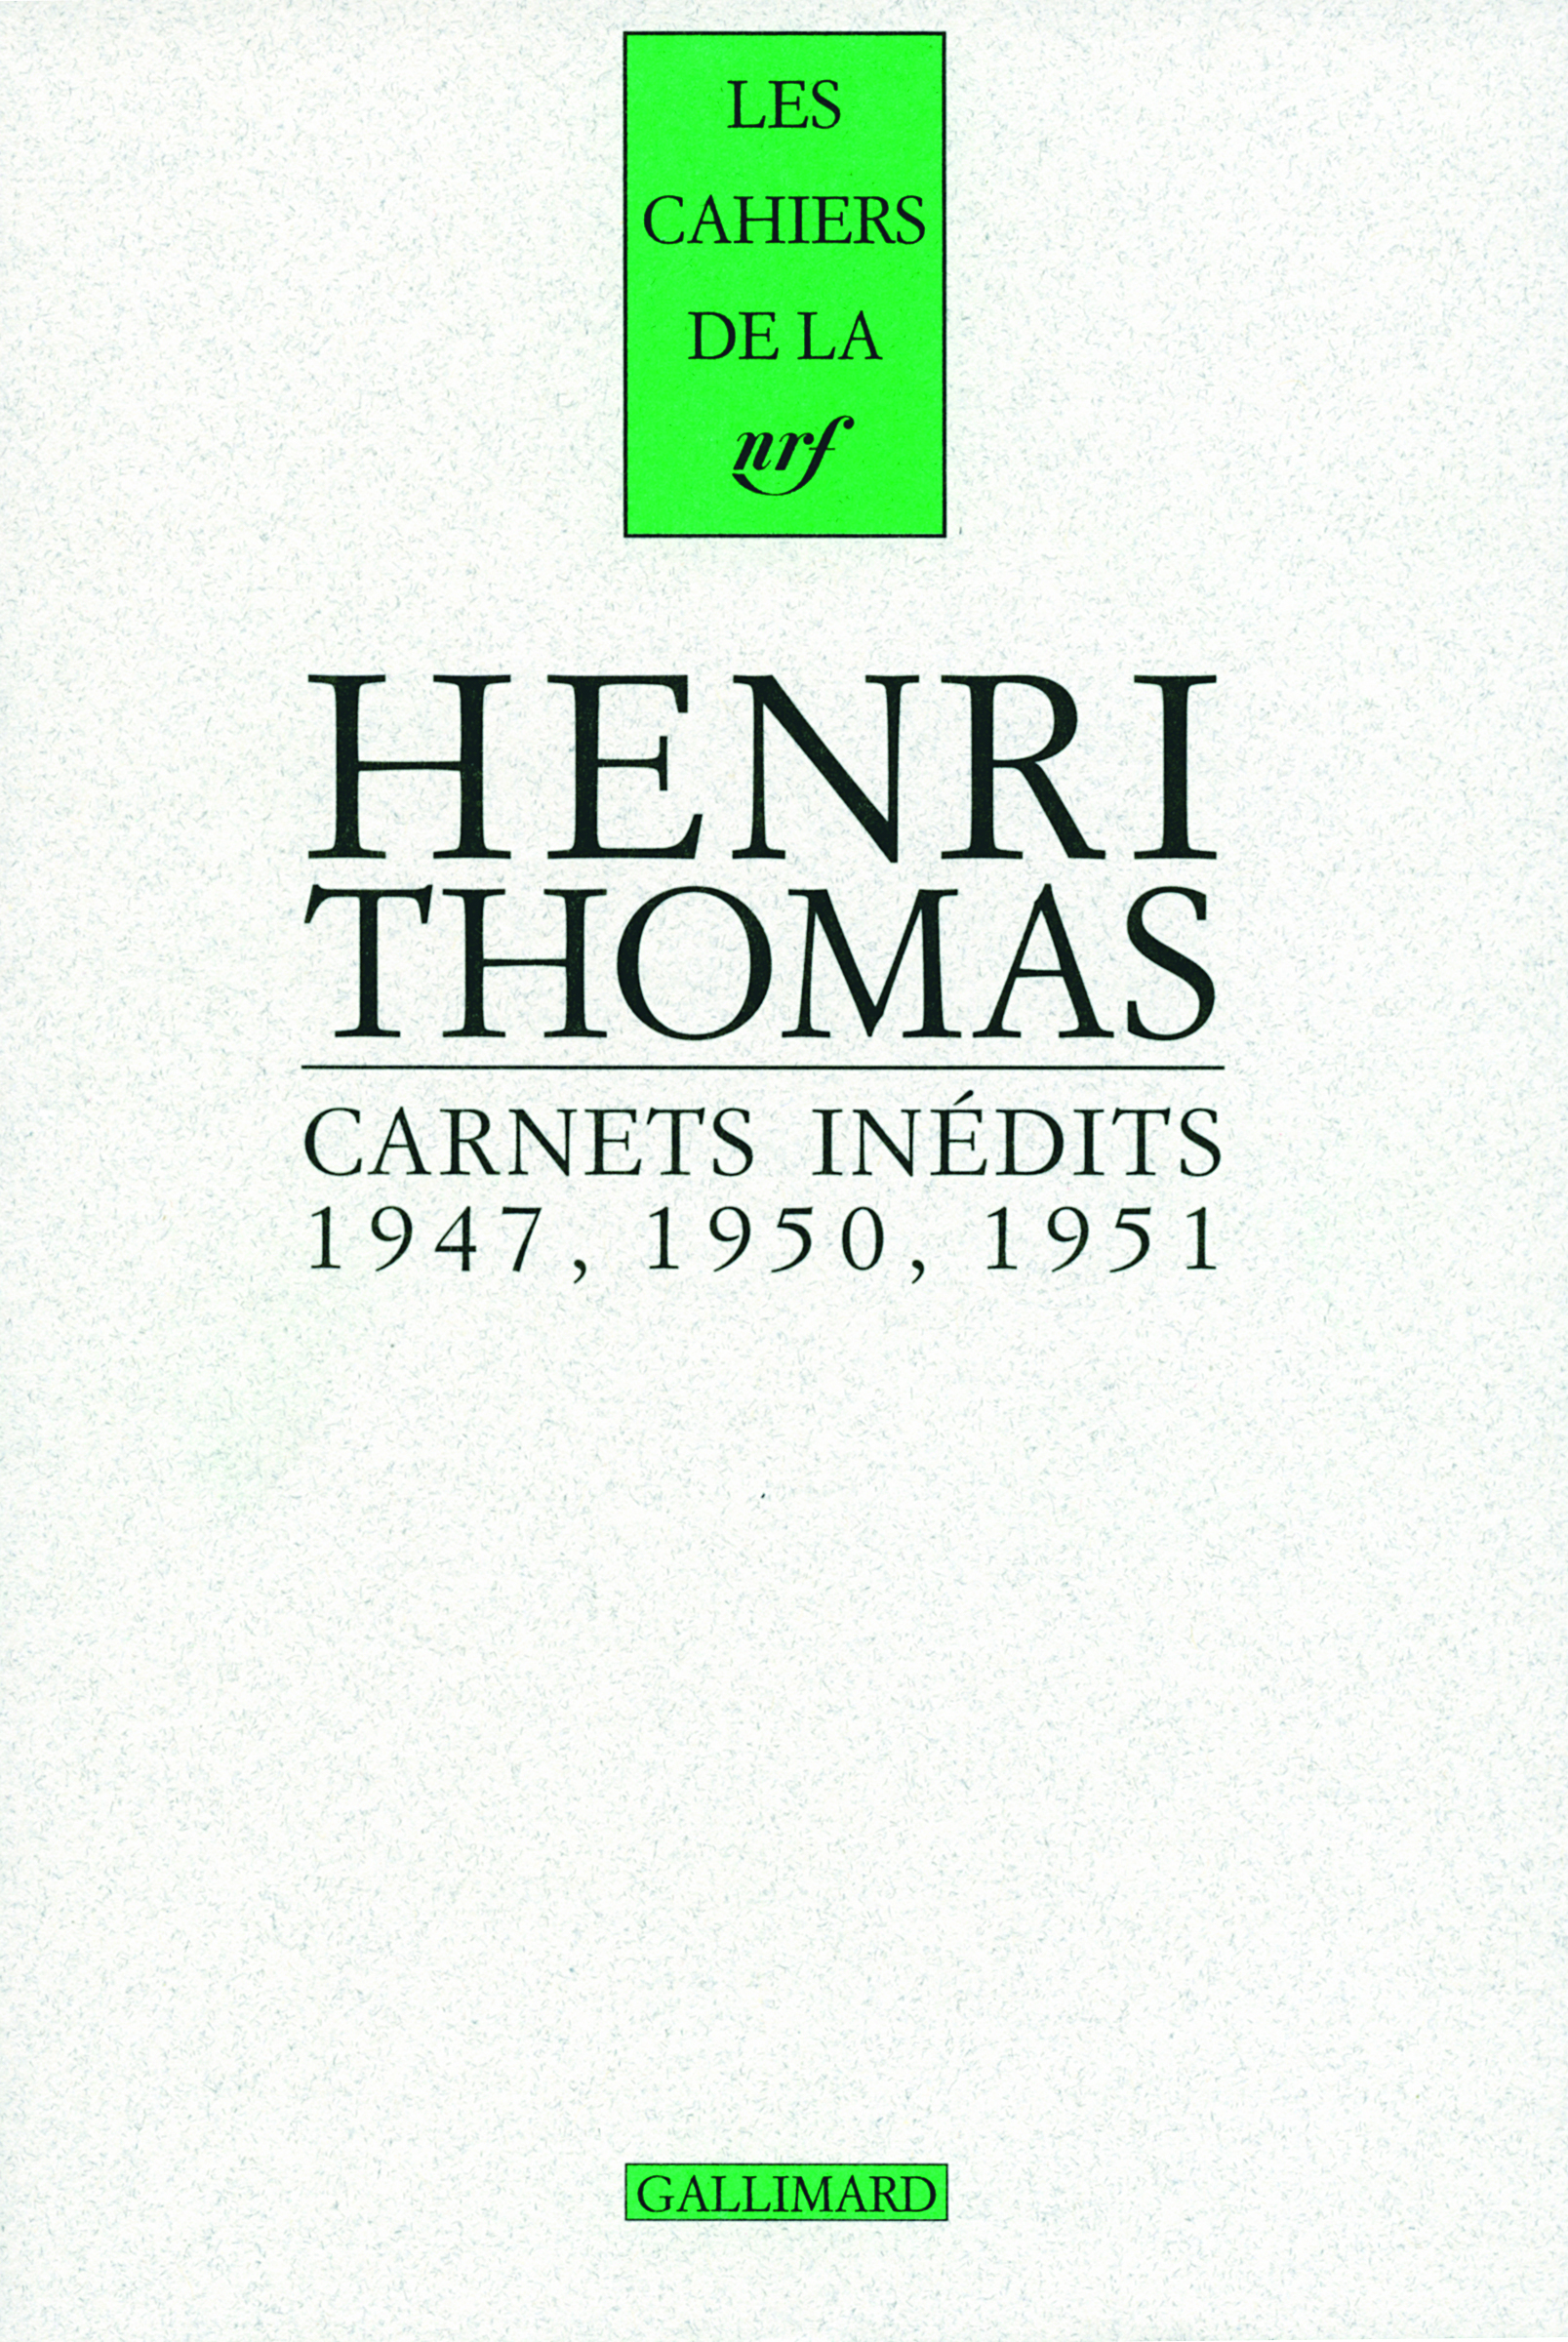 Carnets inédits/Pages 1934-1948, (1947, 1950, 1951) (9782070776580-front-cover)